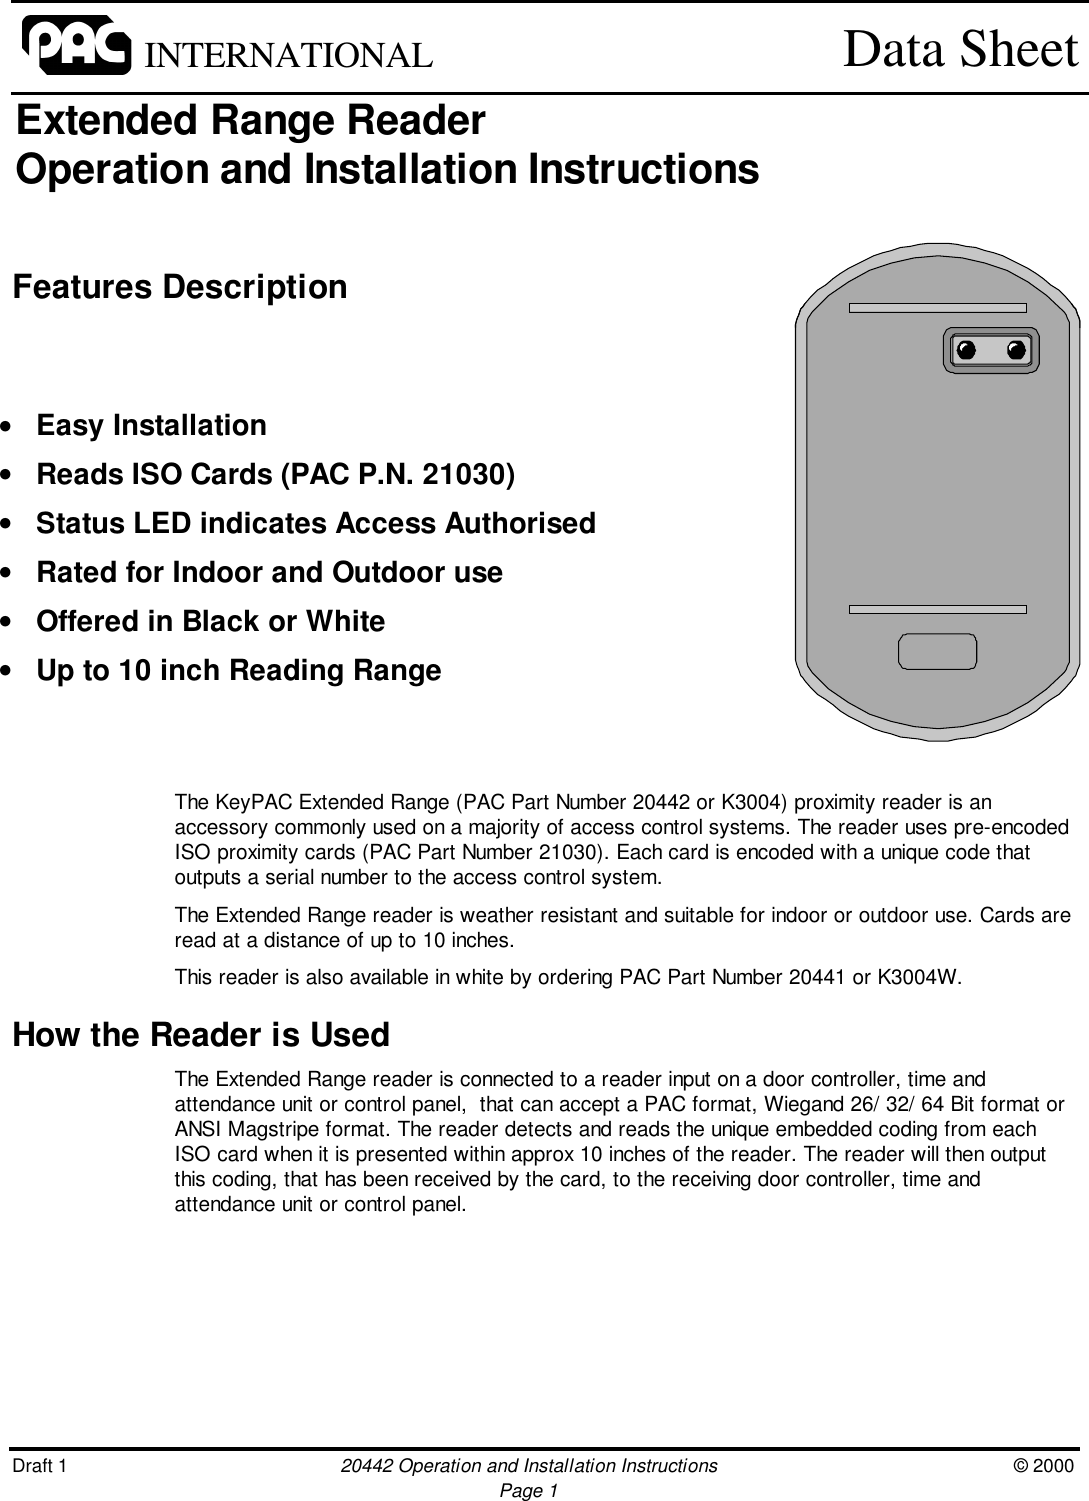 Draft 1 20442 Operation and Installation Instructions © 2000Page 1INTERNATIONAL Data SheetExtended Range ReaderOperation and Installation InstructionsFeatures DescriptionThe KeyPAC Extended Range (PAC Part Number 20442 or K3004) proximity reader is anaccessory commonly used on a majority of access control systems. The reader uses pre-encodedISO proximity cards (PAC Part Number 21030). Each card is encoded with a unique code thatoutputs a serial number to the access control system.The Extended Range reader is weather resistant and suitable for indoor or outdoor use. Cards areread at a distance of up to 10 inches.This reader is also available in white by ordering PAC Part Number 20441 or K3004W.How the Reader is UsedThe Extended Range reader is connected to a reader input on a door controller, time andattendance unit or control panel,  that can accept a PAC format, Wiegand 26/ 32/ 64 Bit format orANSI Magstripe format. The reader detects and reads the unique embedded coding from eachISO card when it is presented within approx 10 inches of the reader. The reader will then outputthis coding, that has been received by the card, to the receiving door controller, time andattendance unit or control panel.• Easy Installation• Reads ISO Cards (PAC P.N. 21030)• Status LED indicates Access Authorised• Rated for Indoor and Outdoor use• Offered in Black or White• Up to 10 inch Reading Range